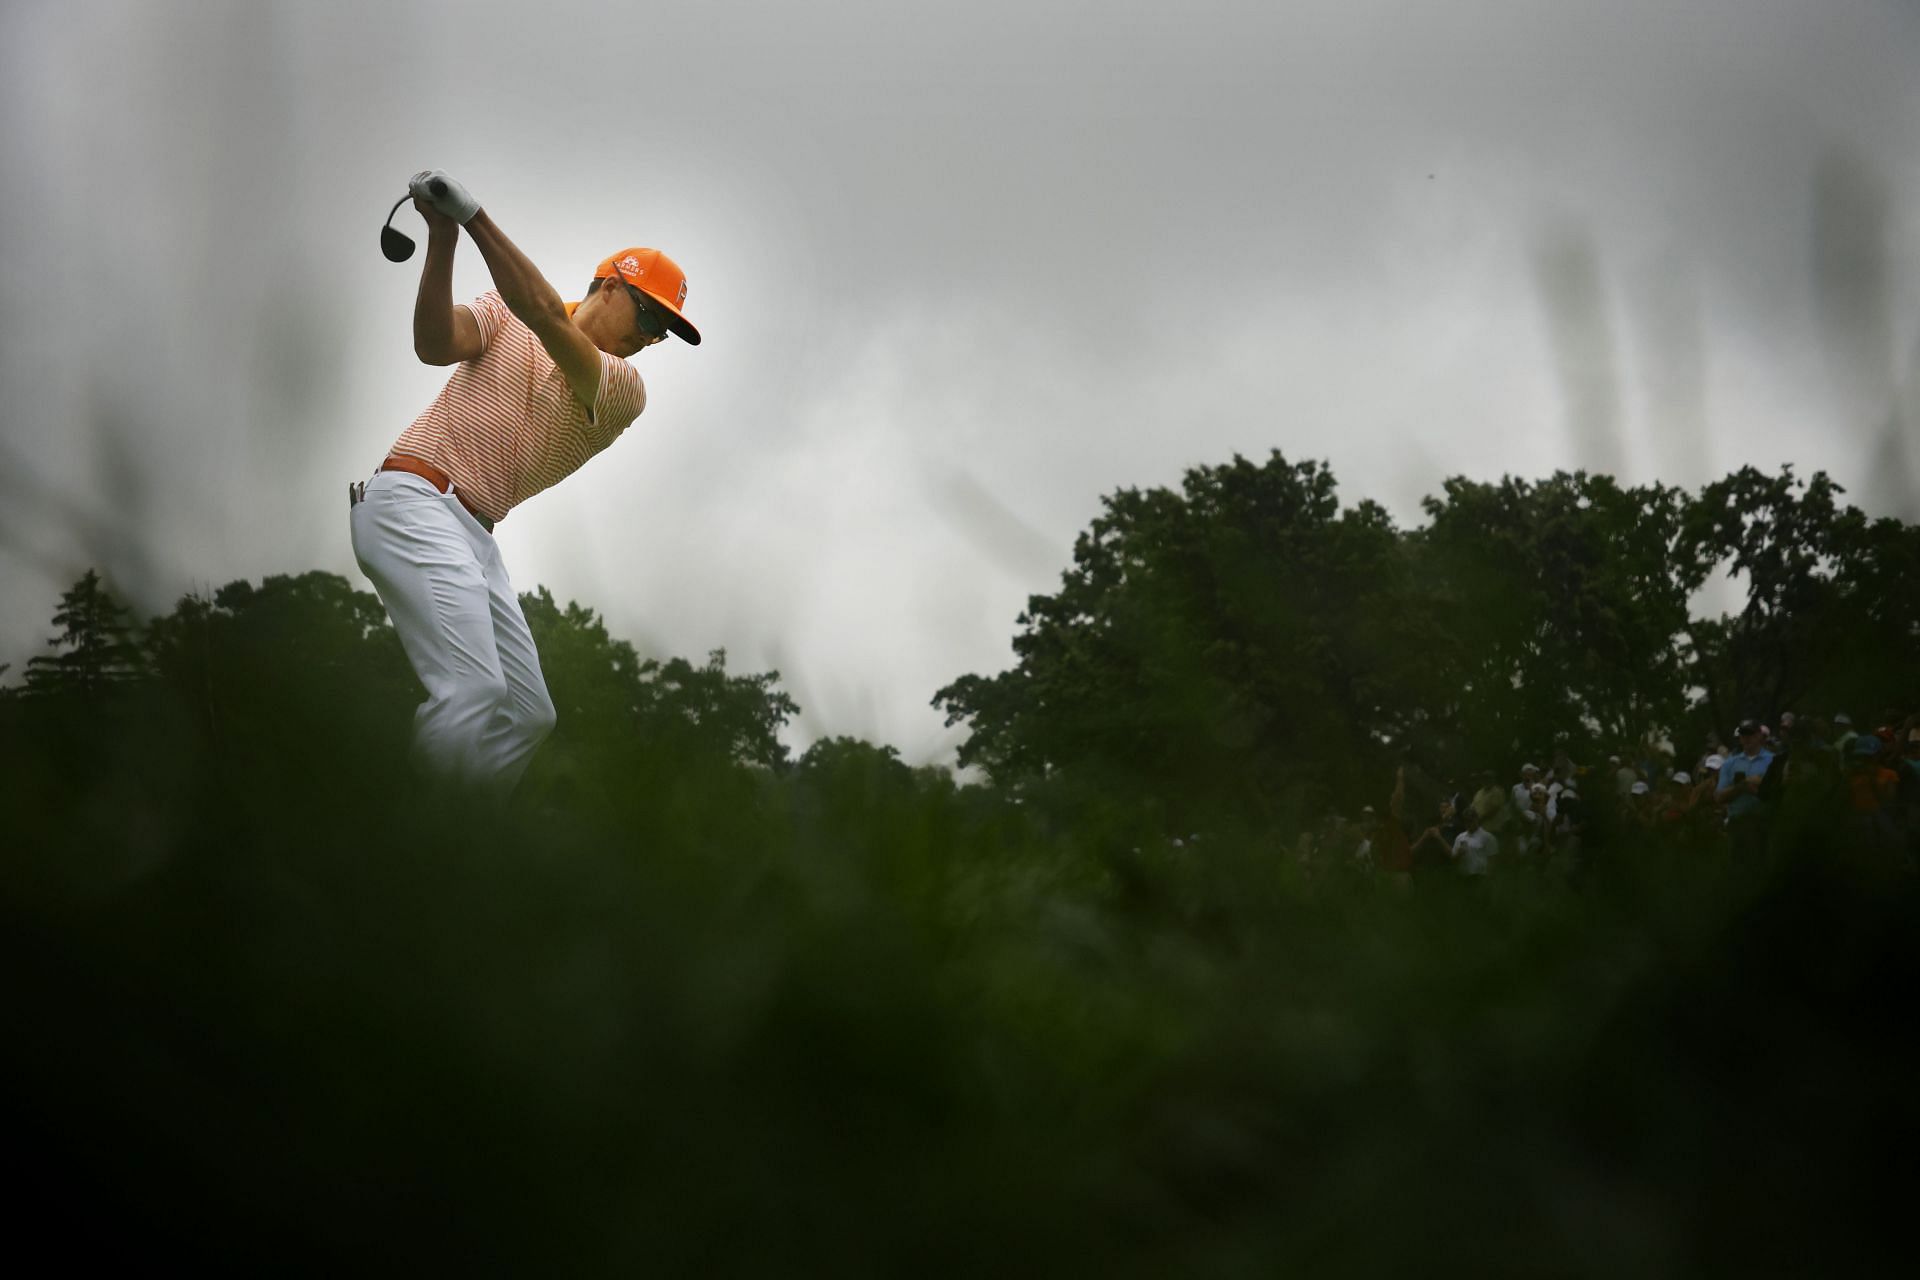 Rickie Fowler at the 2023 Rocket Mortgage Classic - Final Round (Image via Getty).